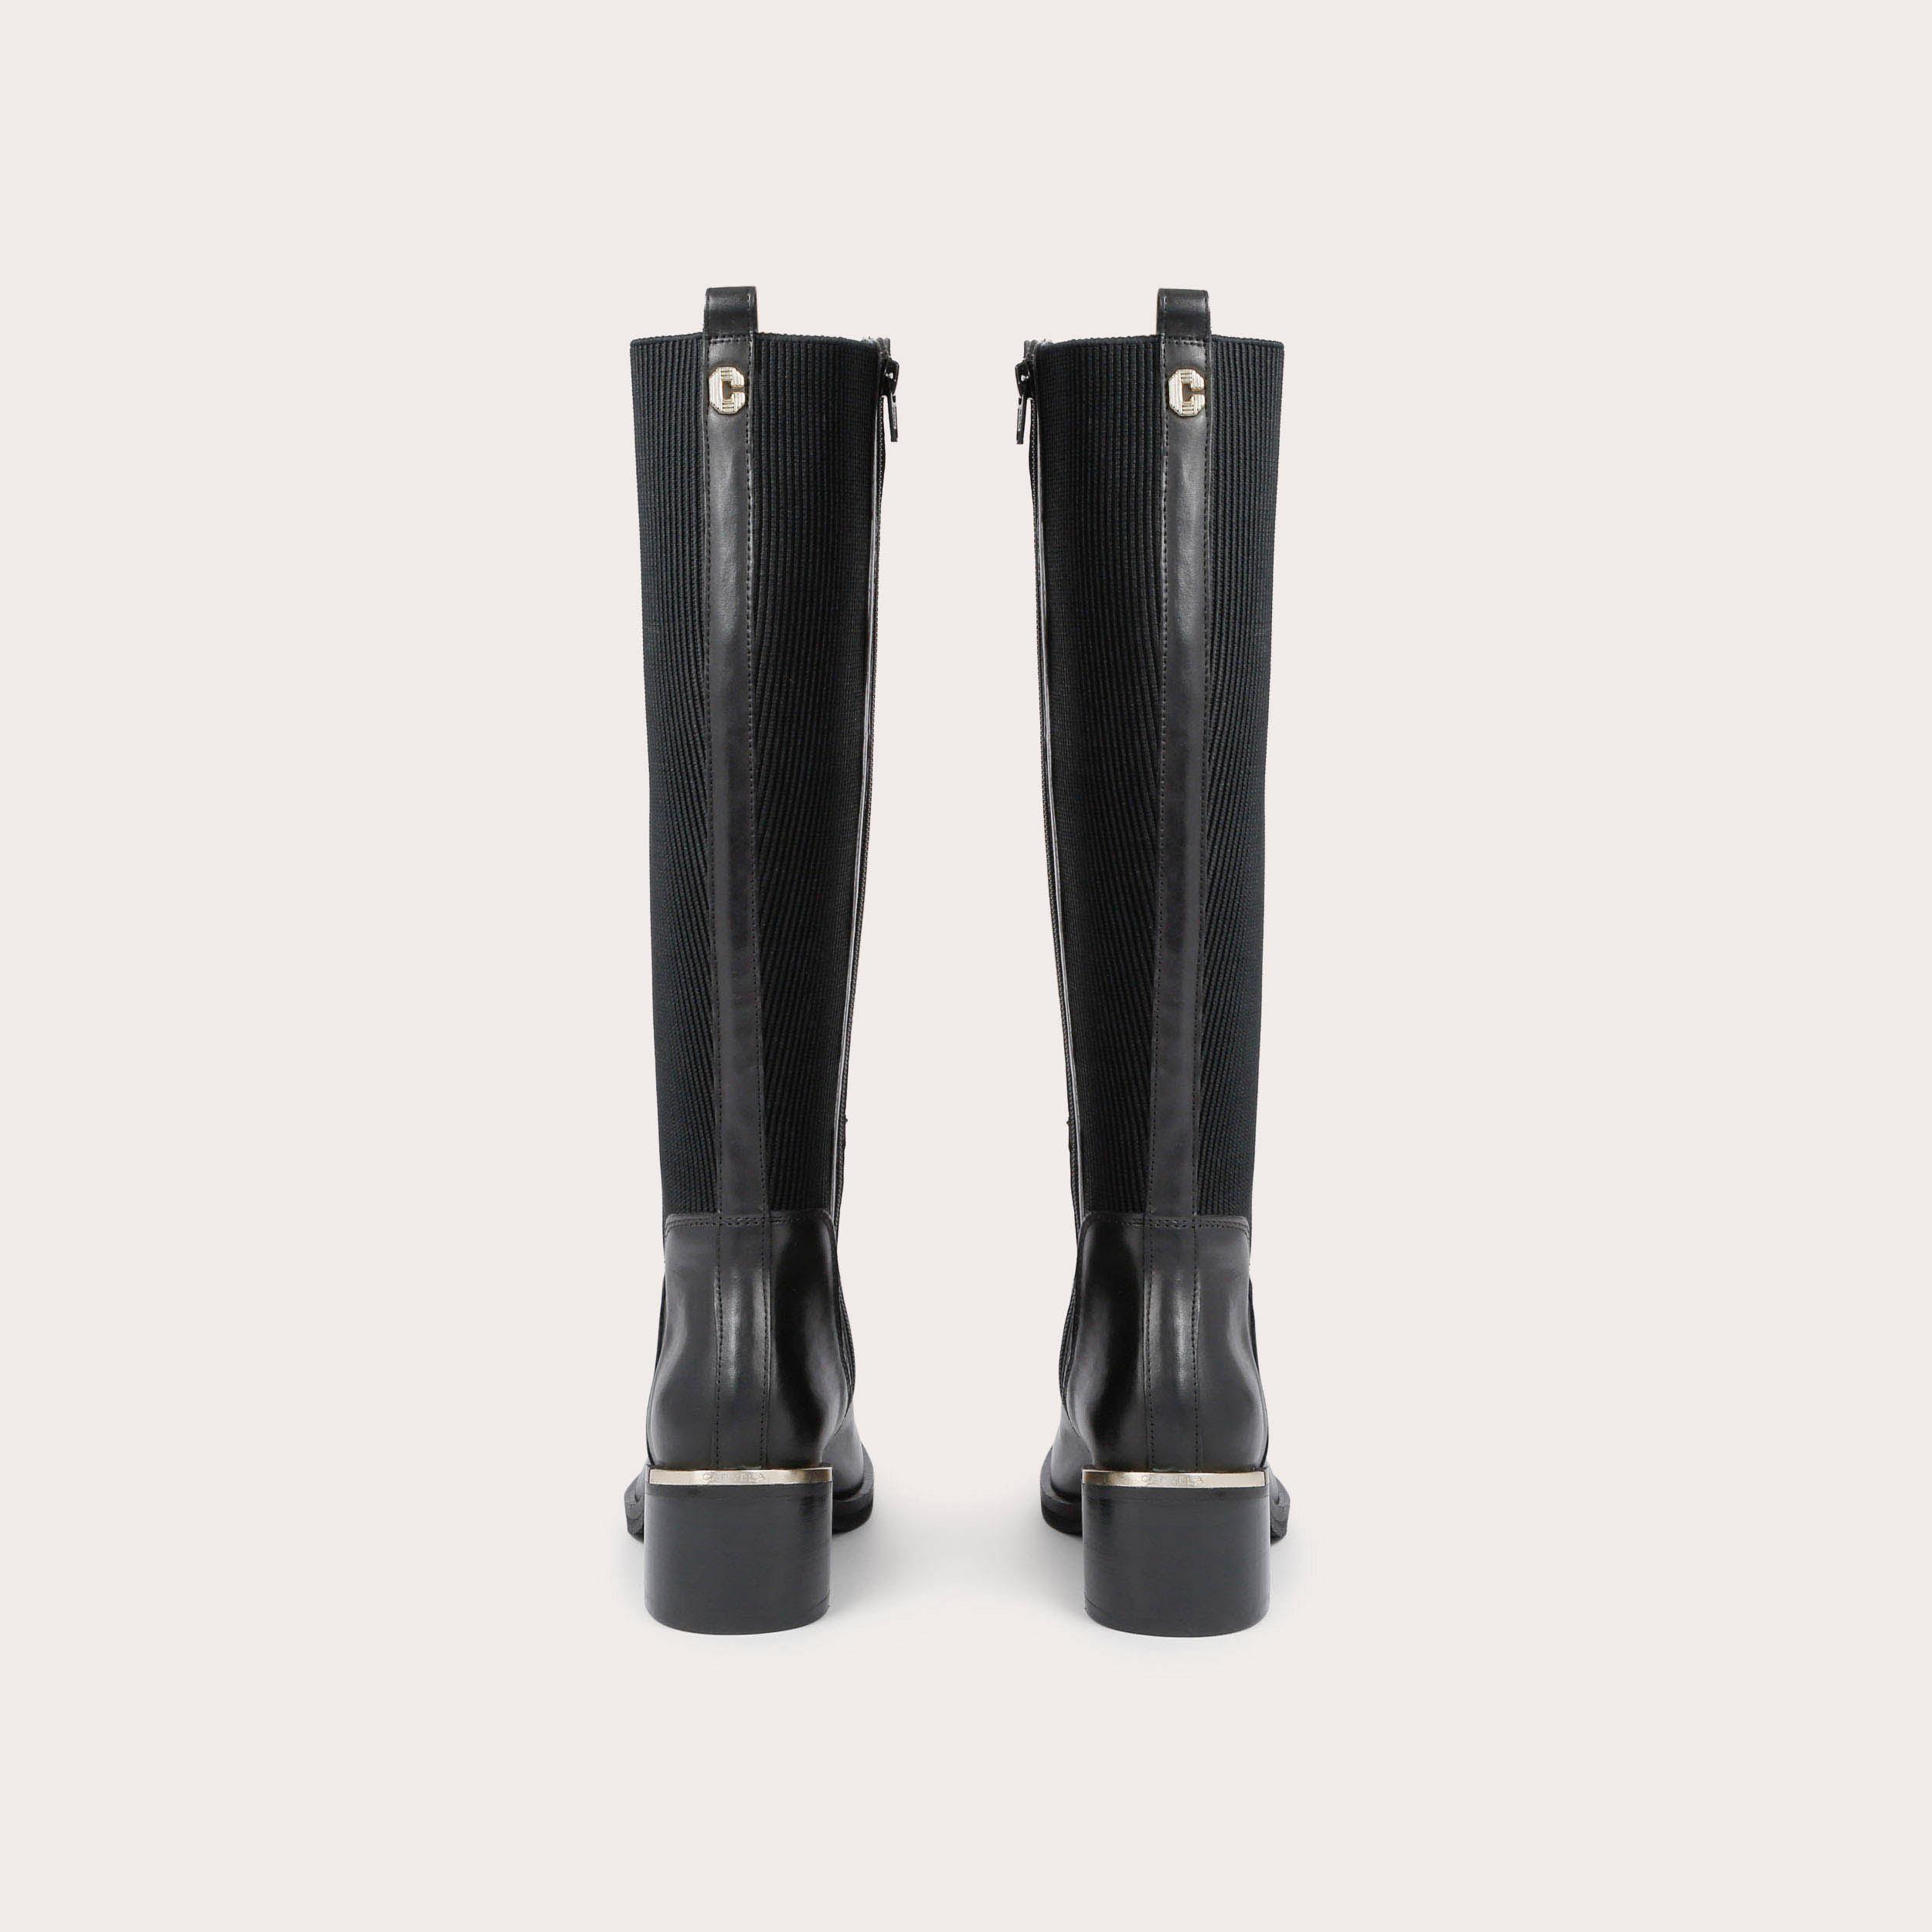 LIBERTY HIGH Black Knee High Boots by CARVELA